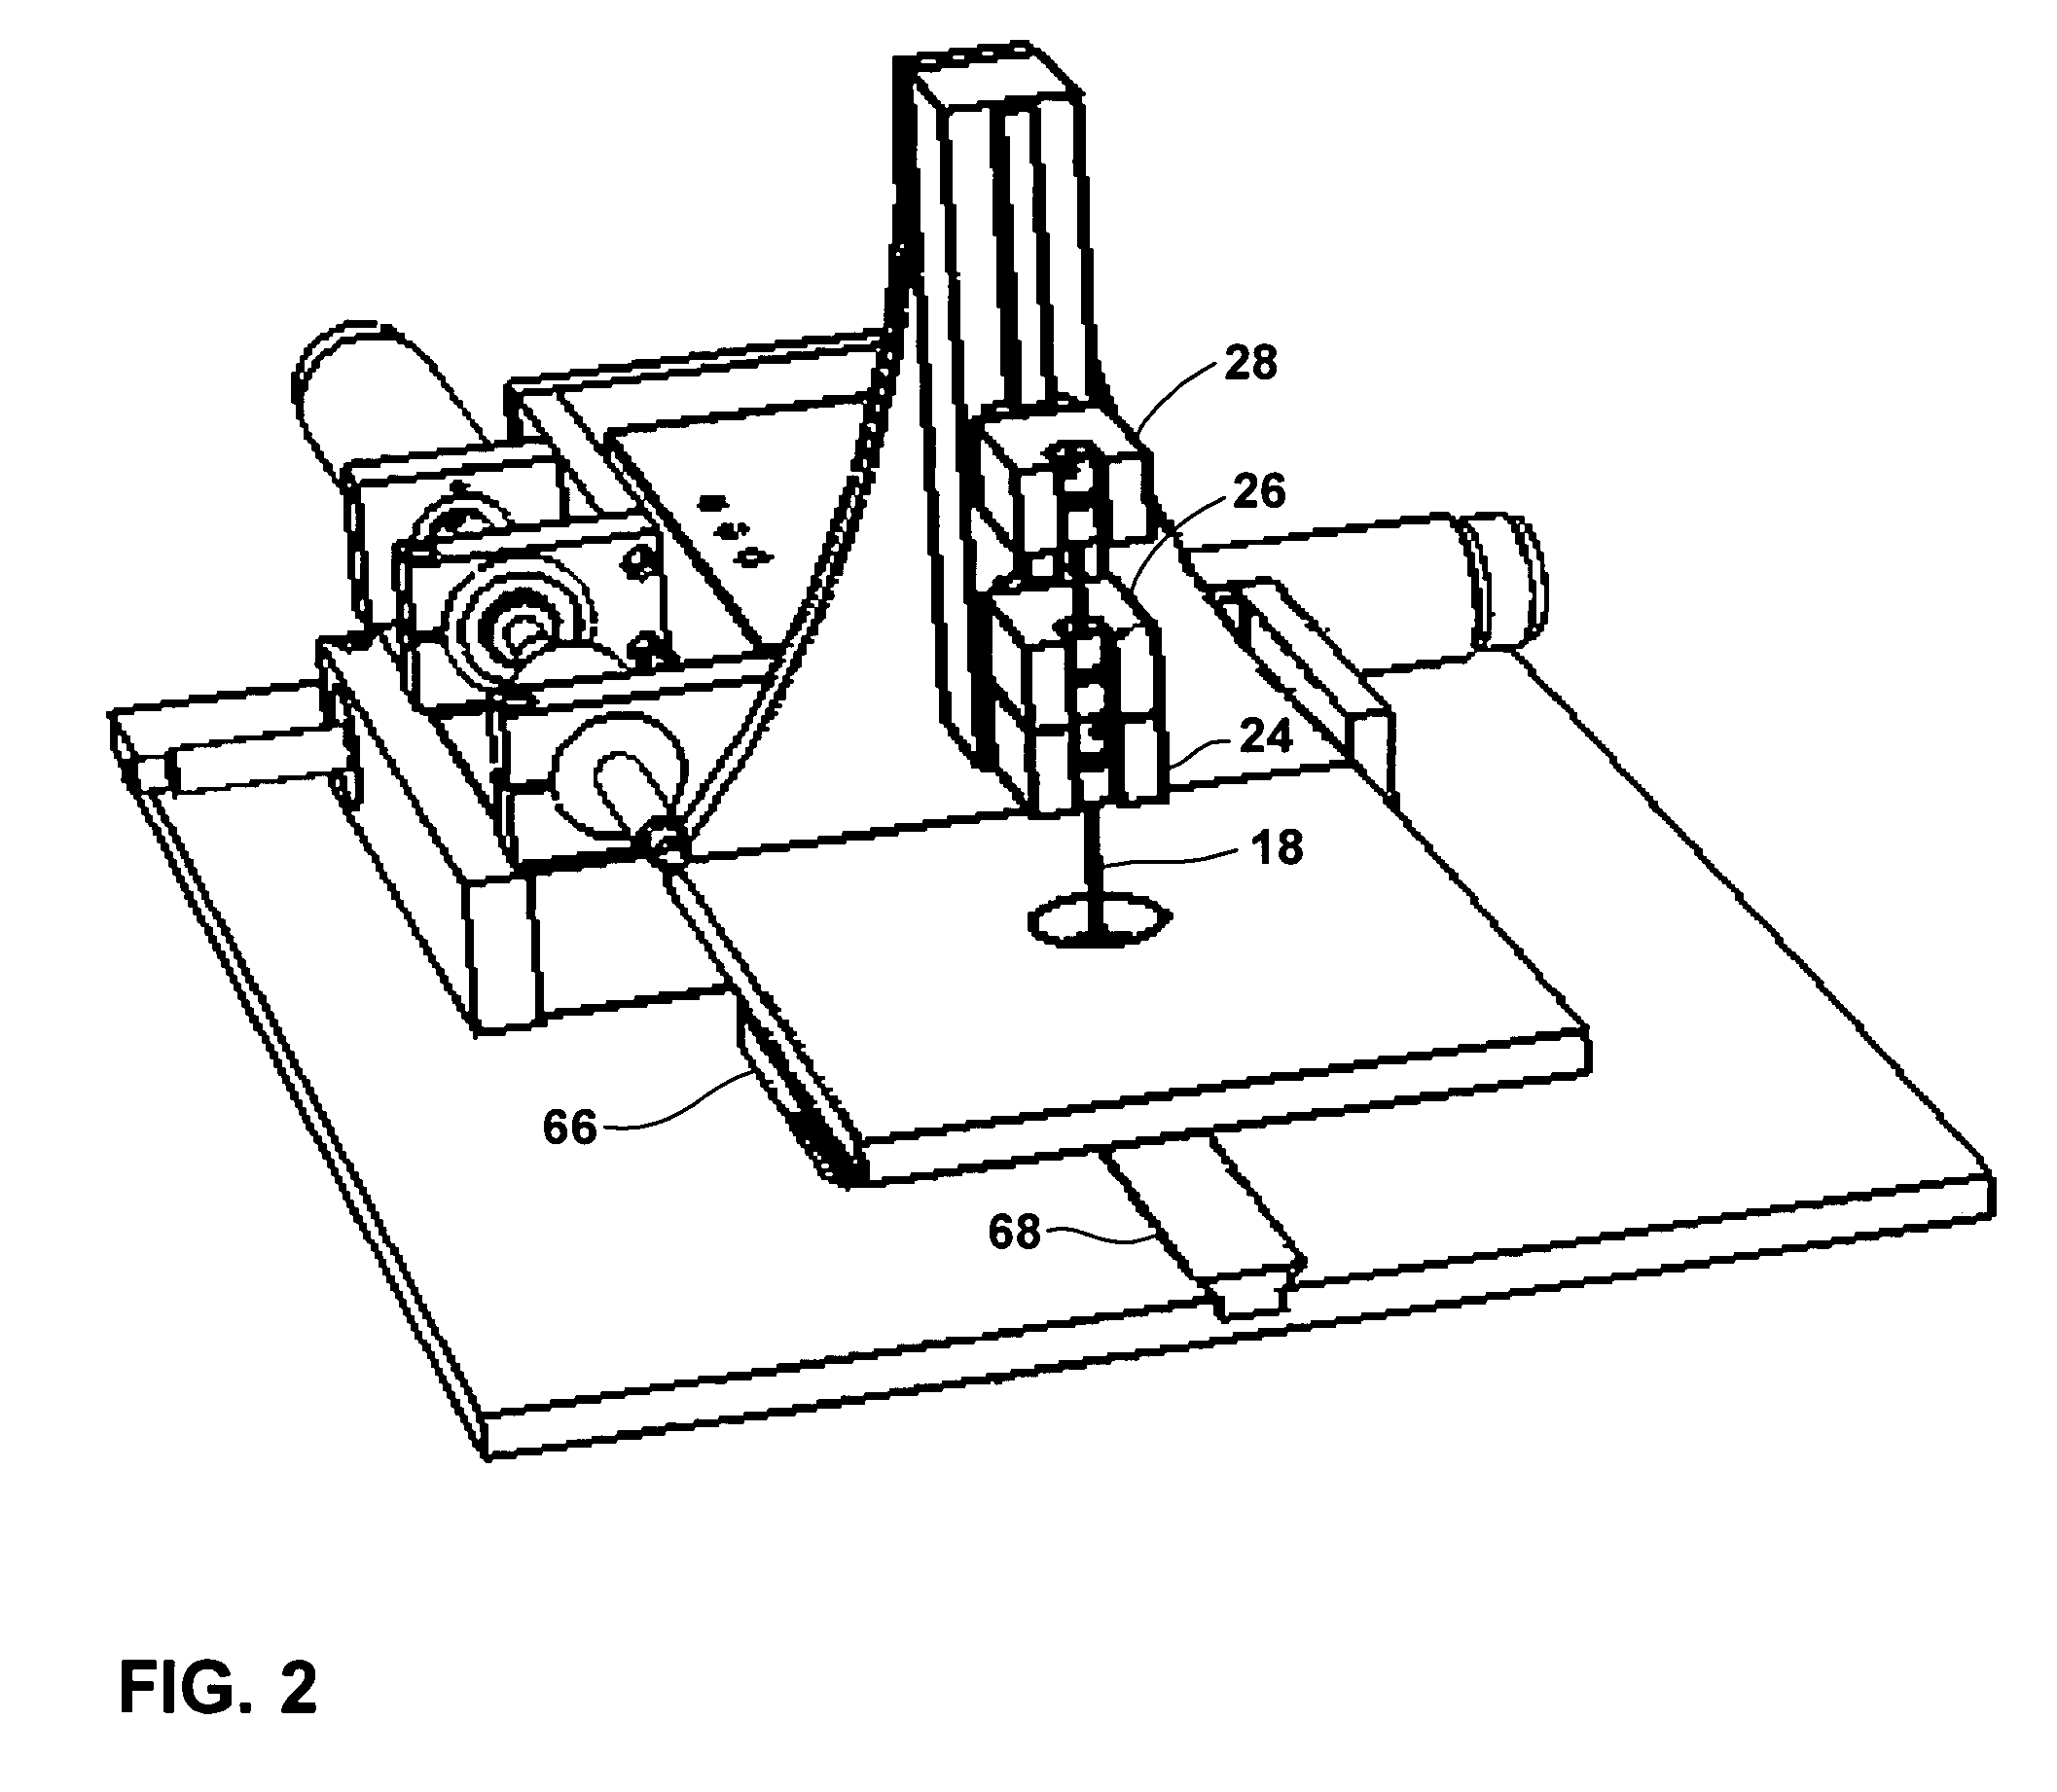 Microarrayer with coaxial multiple punches